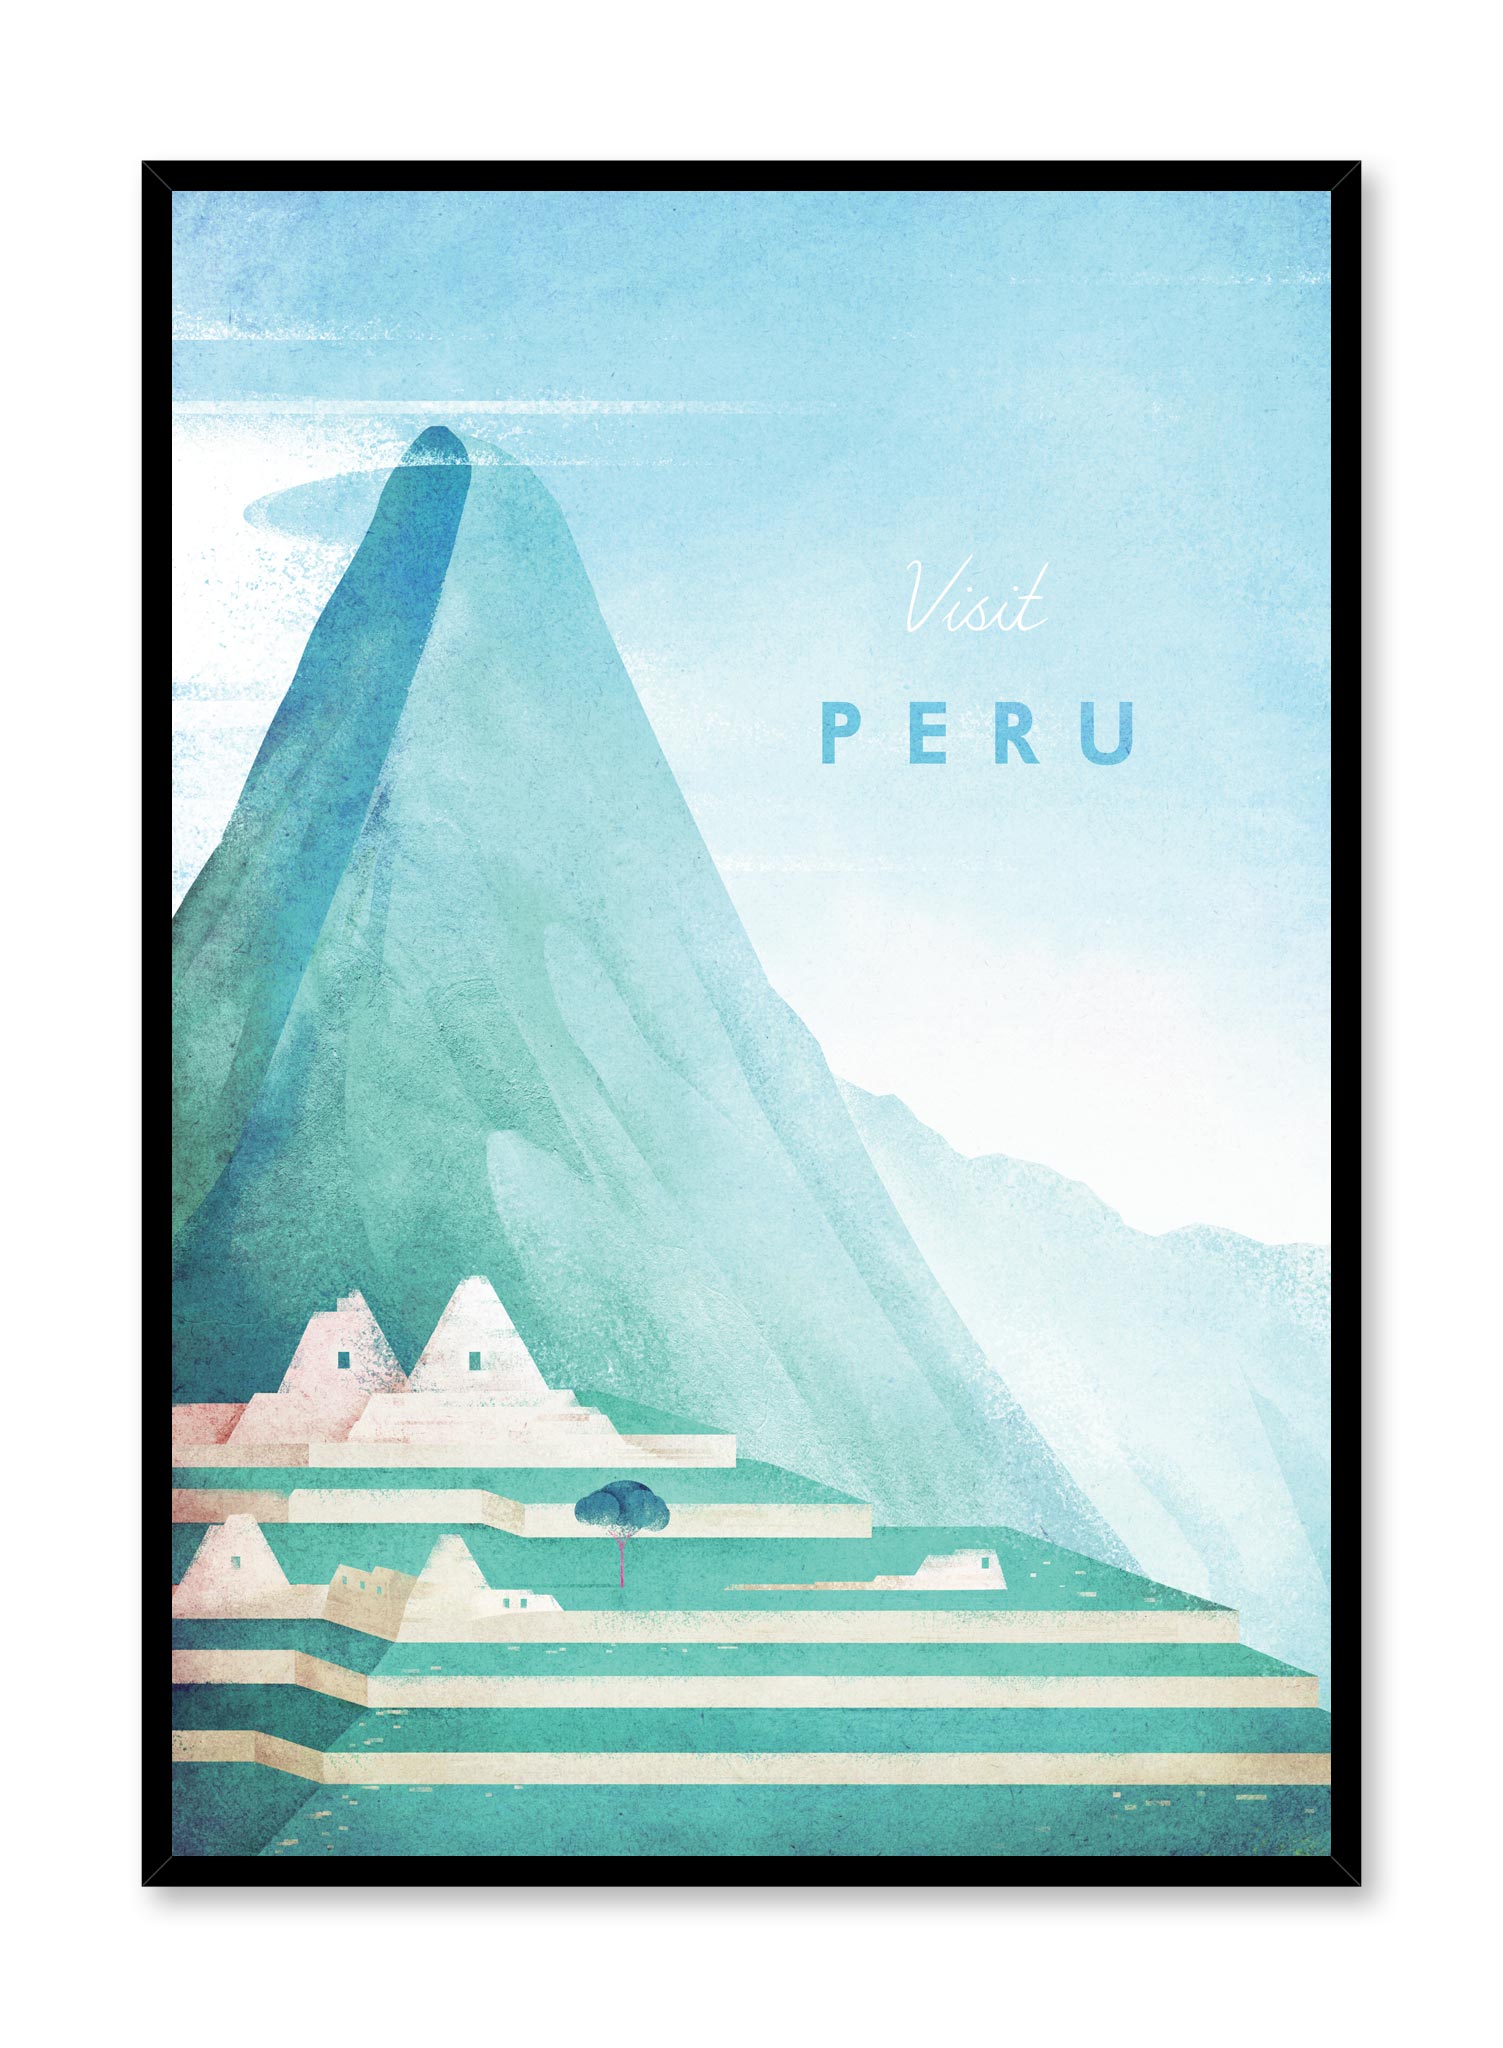 Modern minimalist poster by Opposite Wall with illustration of Peru